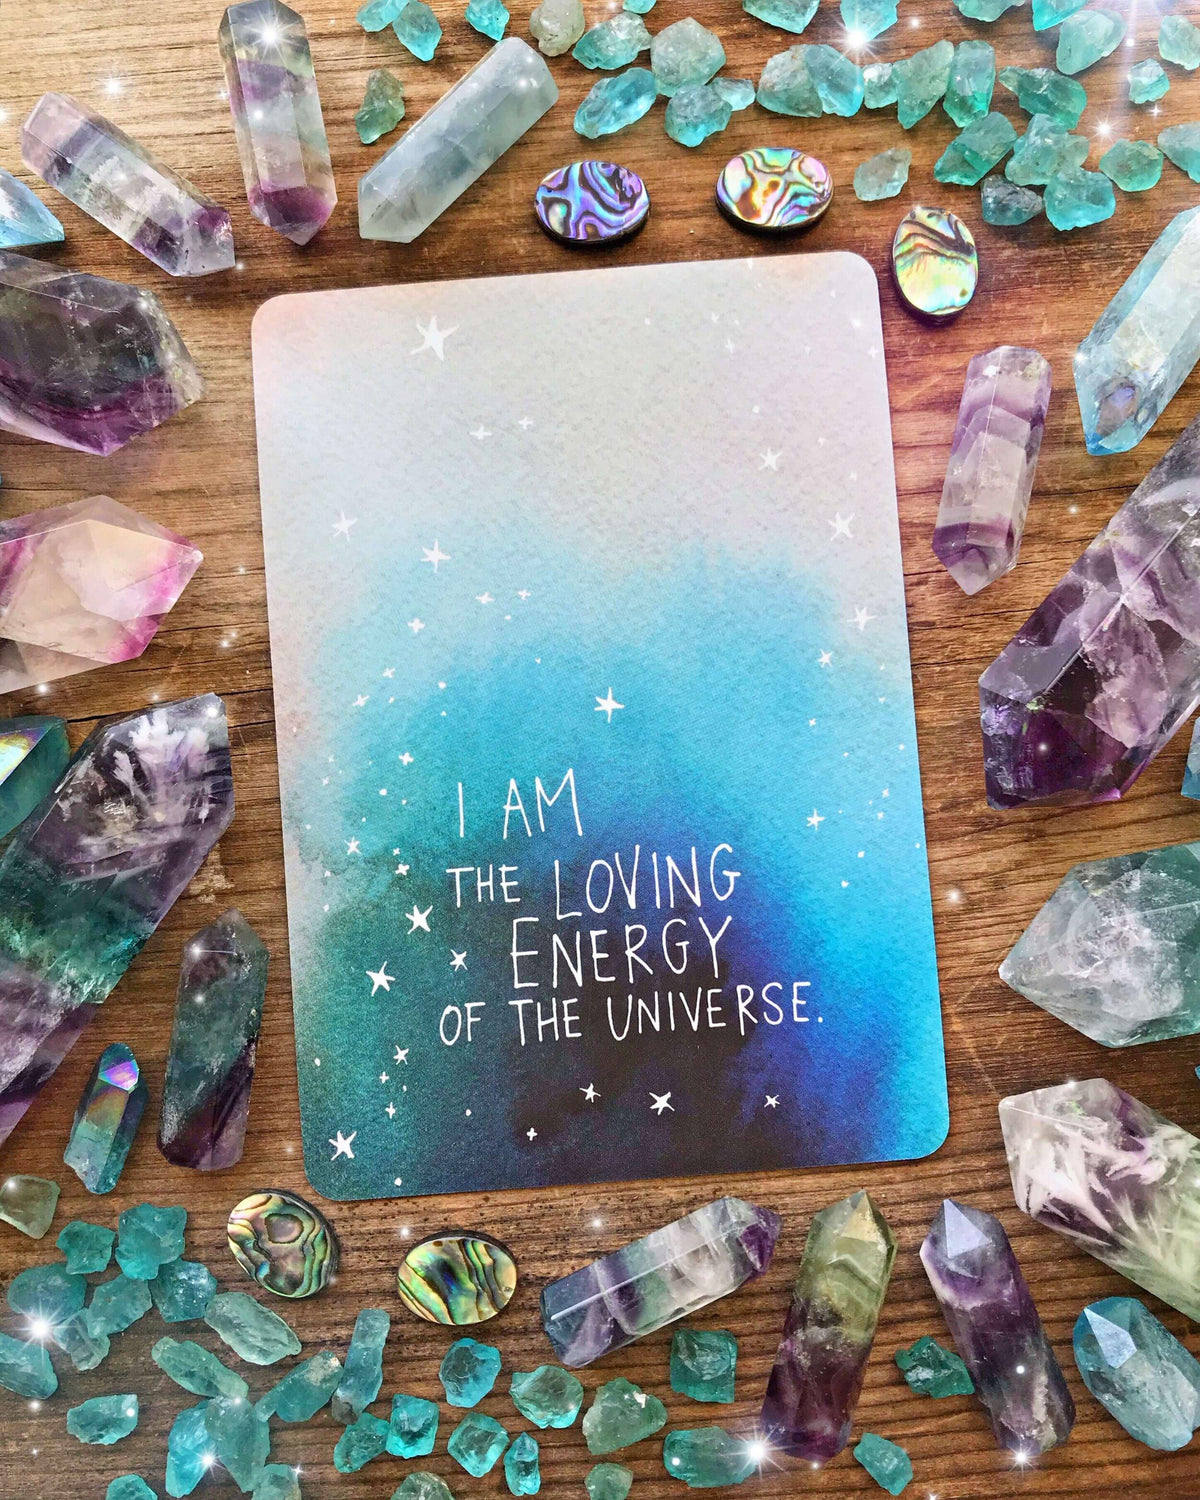 The Universe Has Your Back Affirmation Card Deck